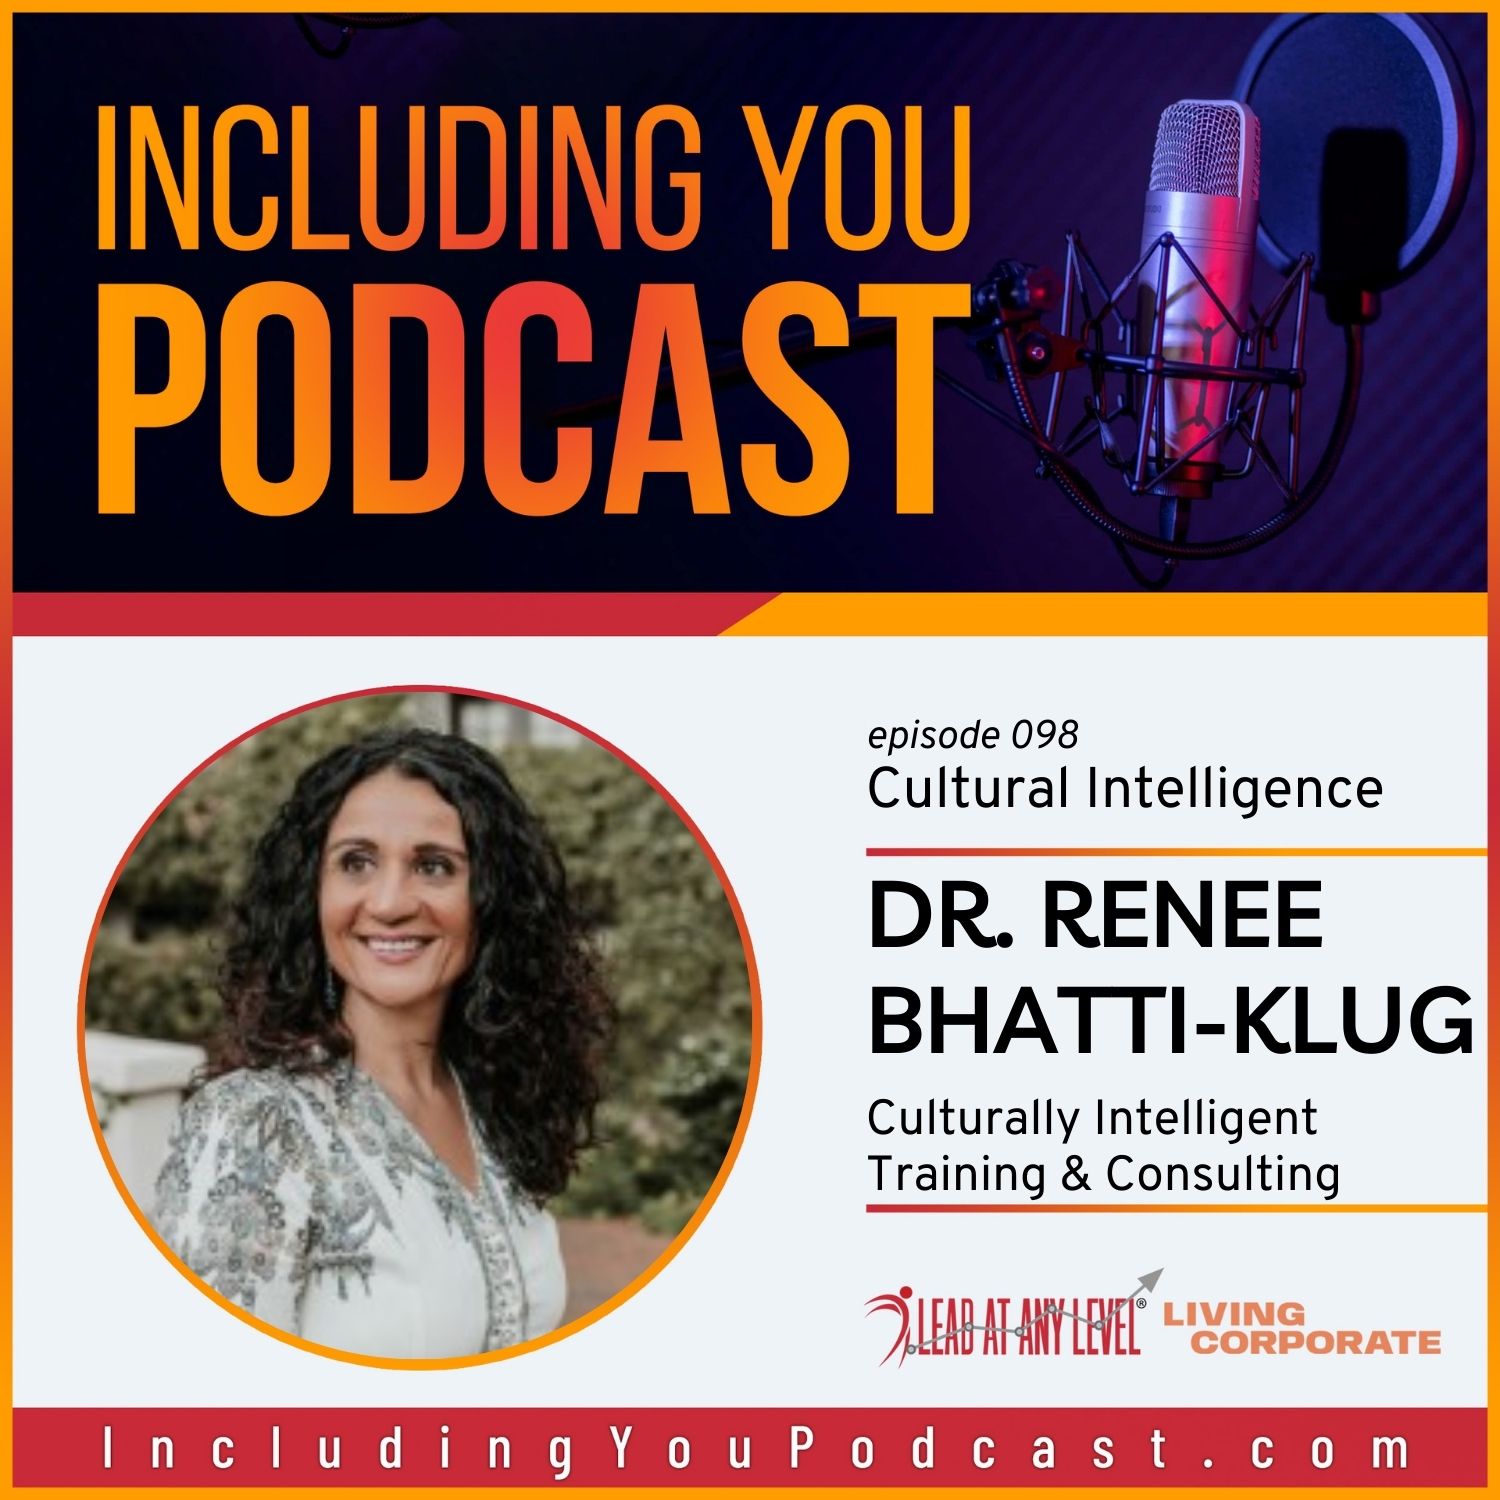 e098. Cultural Intelligence with Dr. Renee Bhatti-Klug